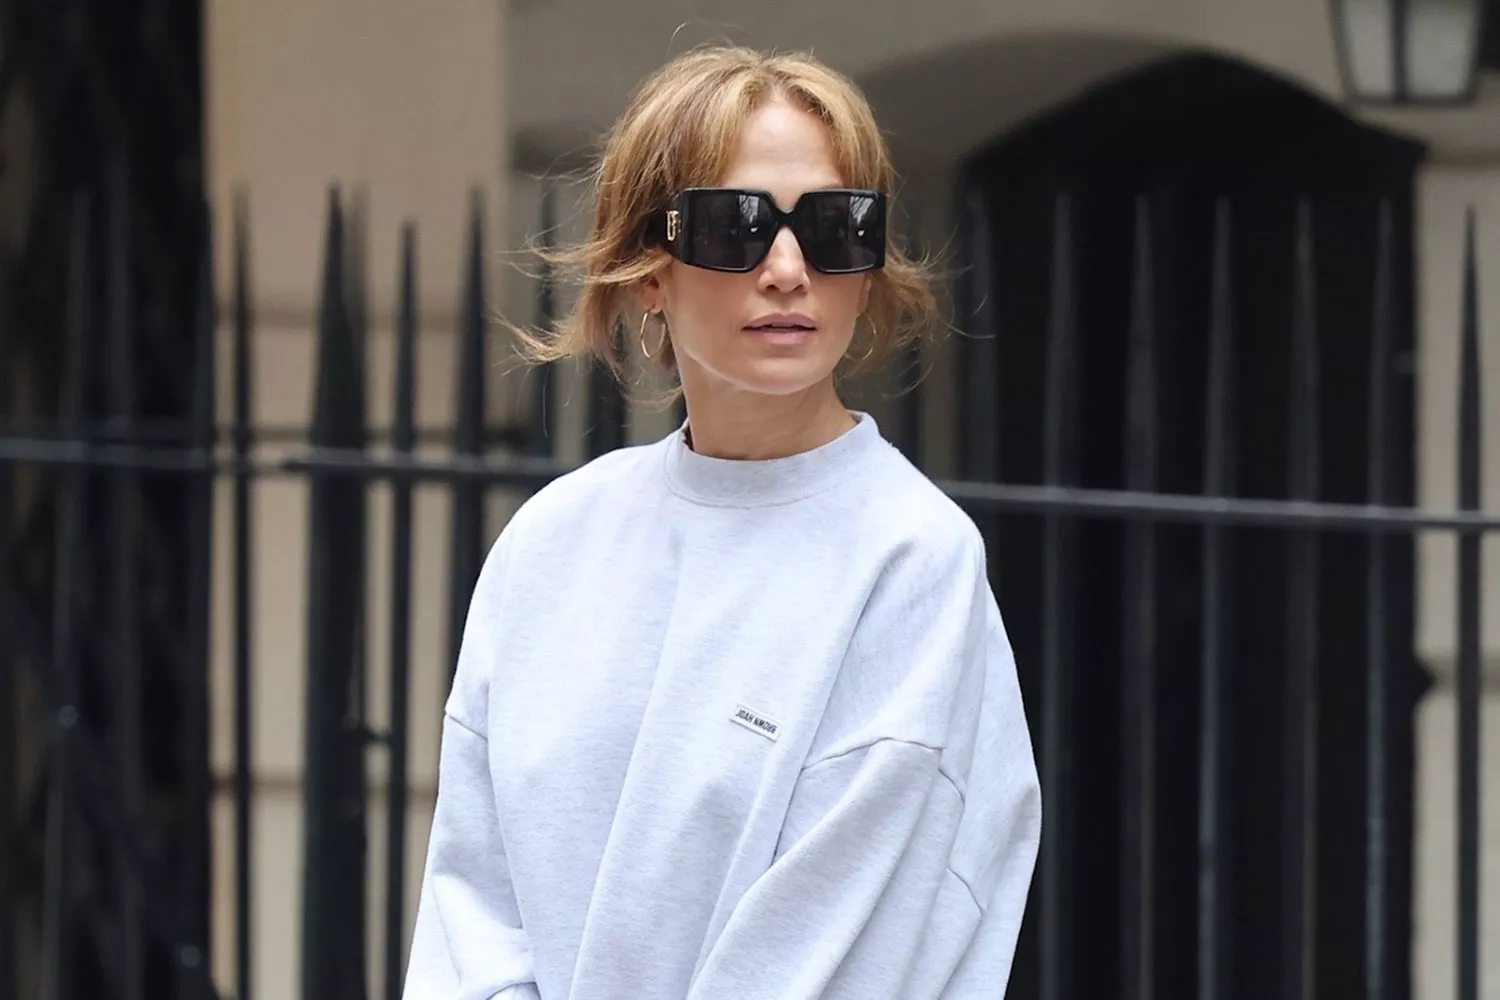 Singer Jennifer Lopez was spotted checking out a luxurious $6.75 million townhouse in Manhattan, indicating she might be on the hunt for a new home.